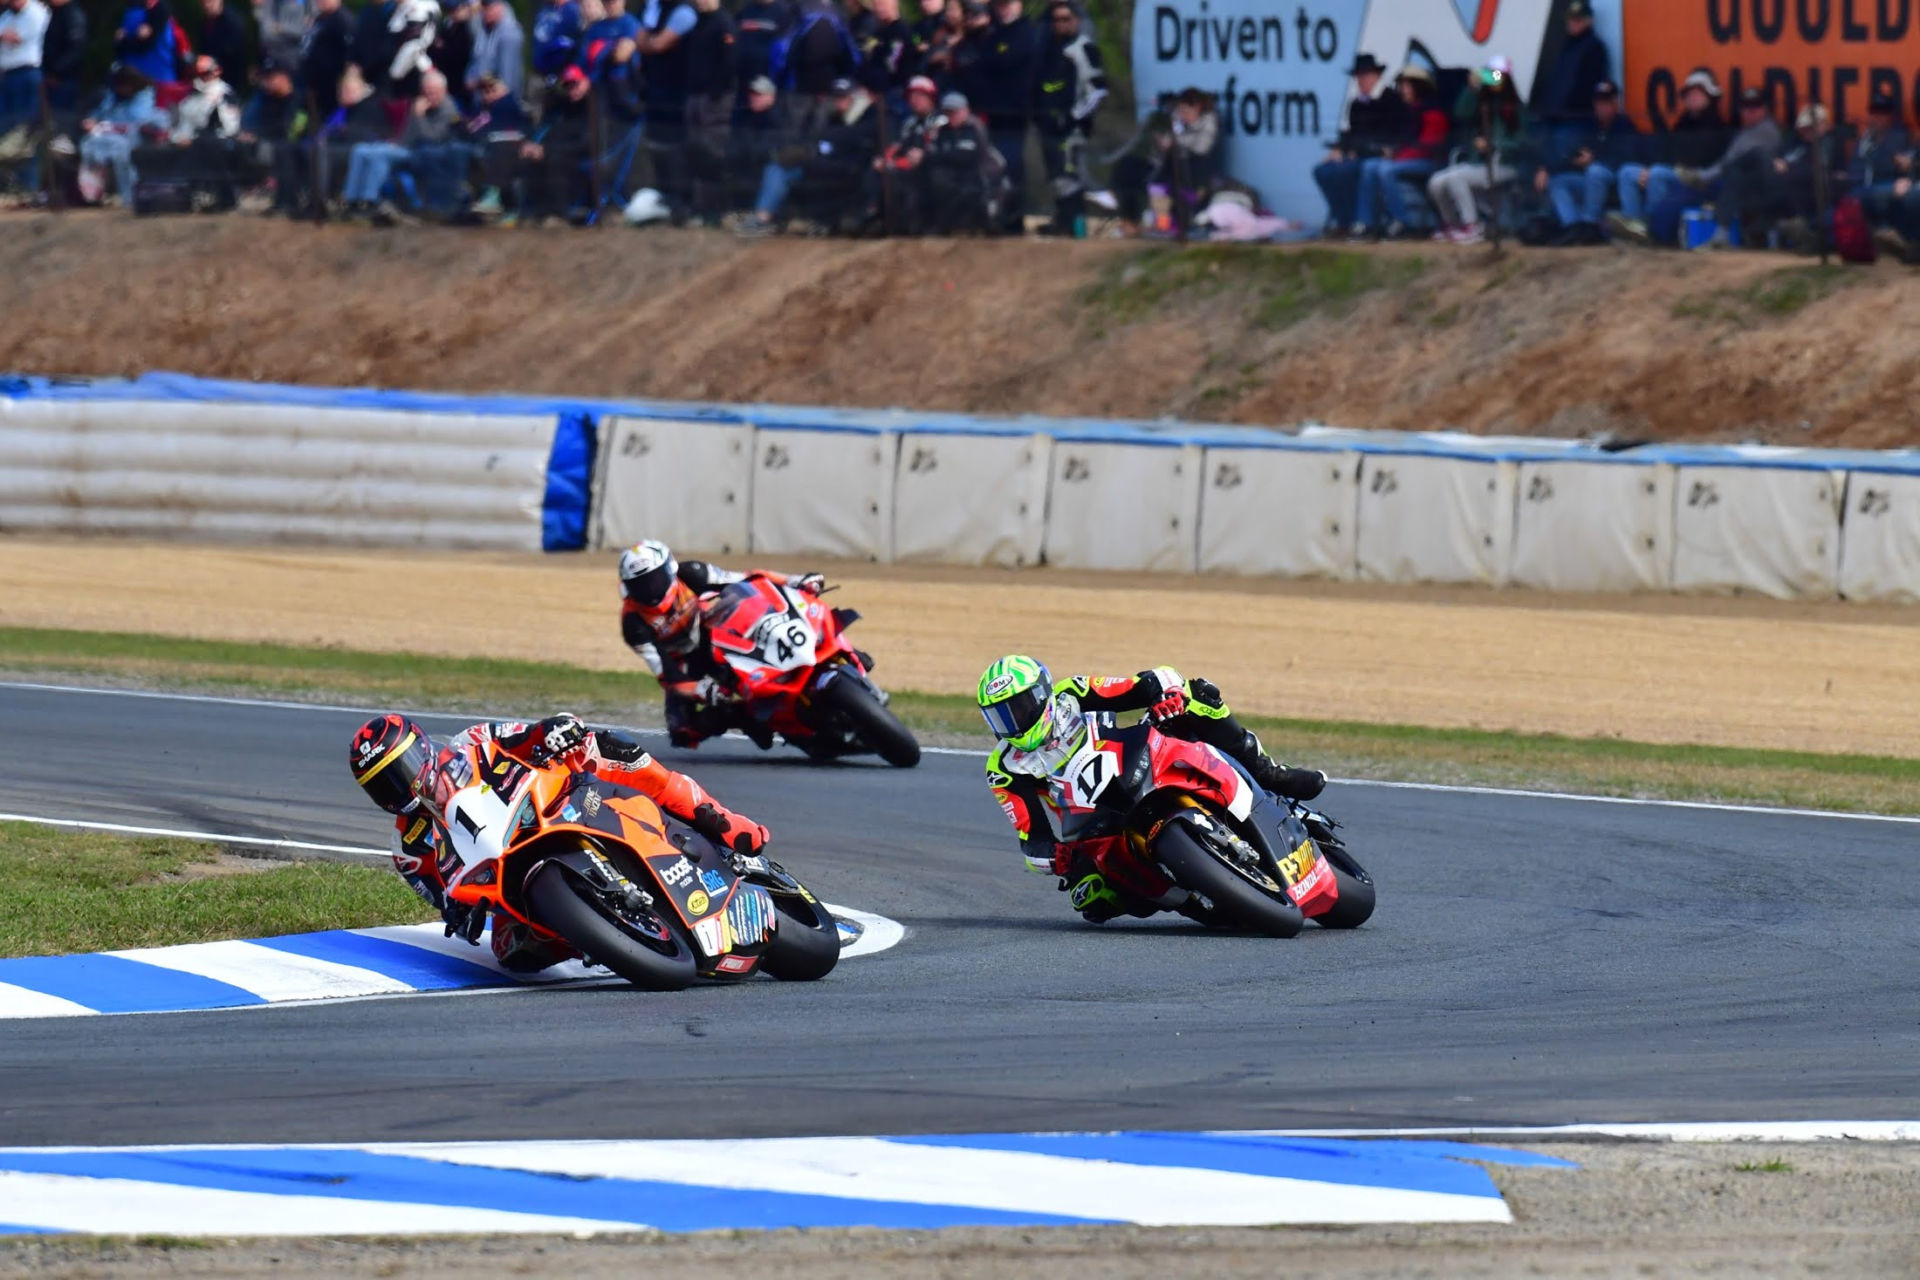 Wayne Maxwell (1) leads Troy Herfoss (17) and Mike Jones (46) during an ASBK race earlier in 2021 at Wakefield Park. Photo by Optikal Photography, courtesy ASBK.